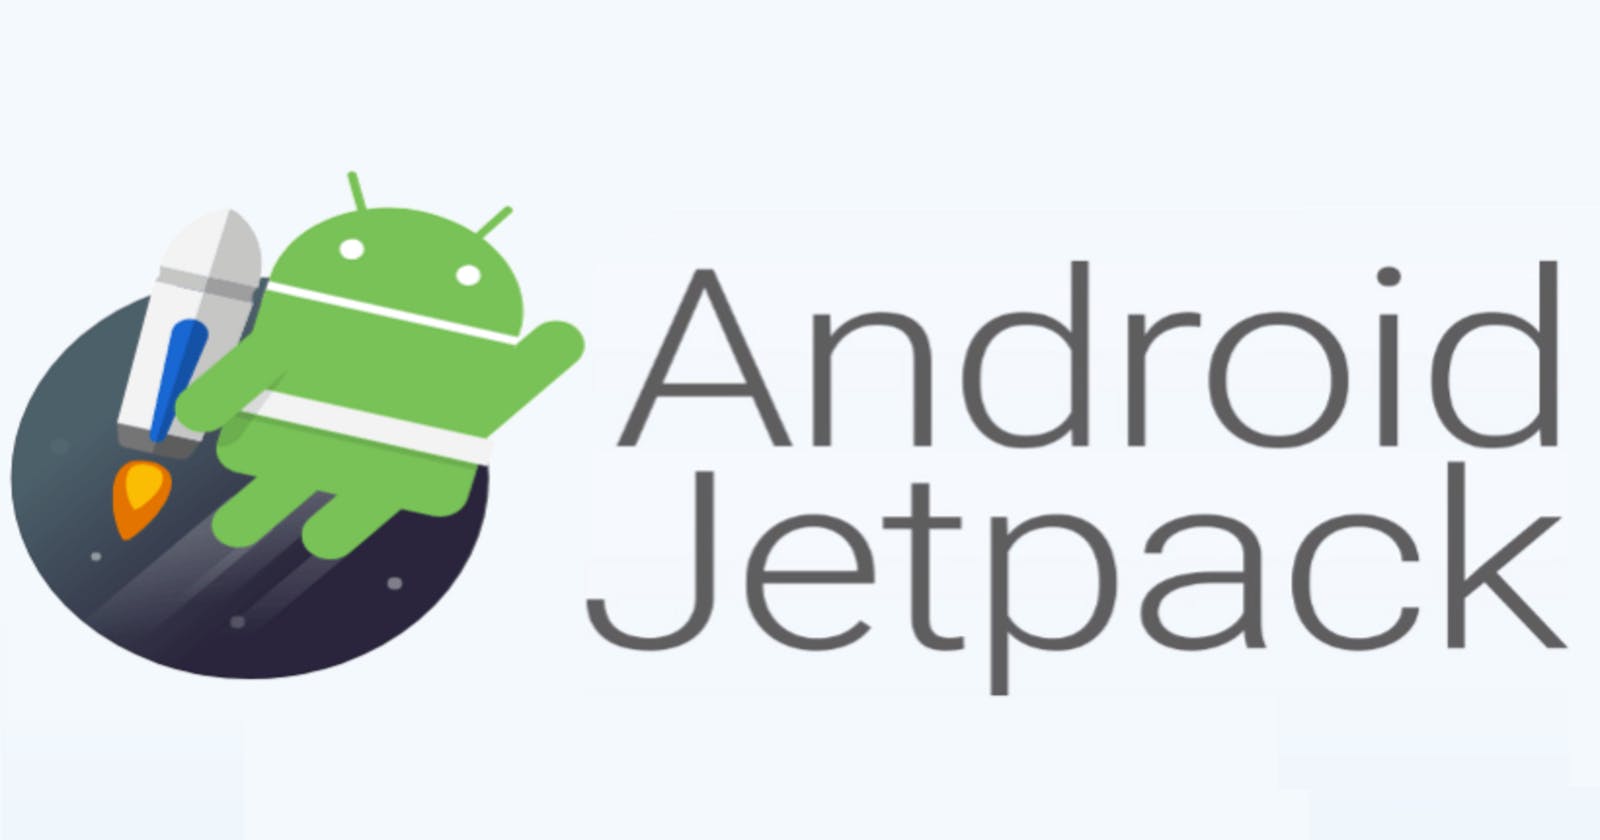 Android Jetpack Compose - Creating A Simple Todo